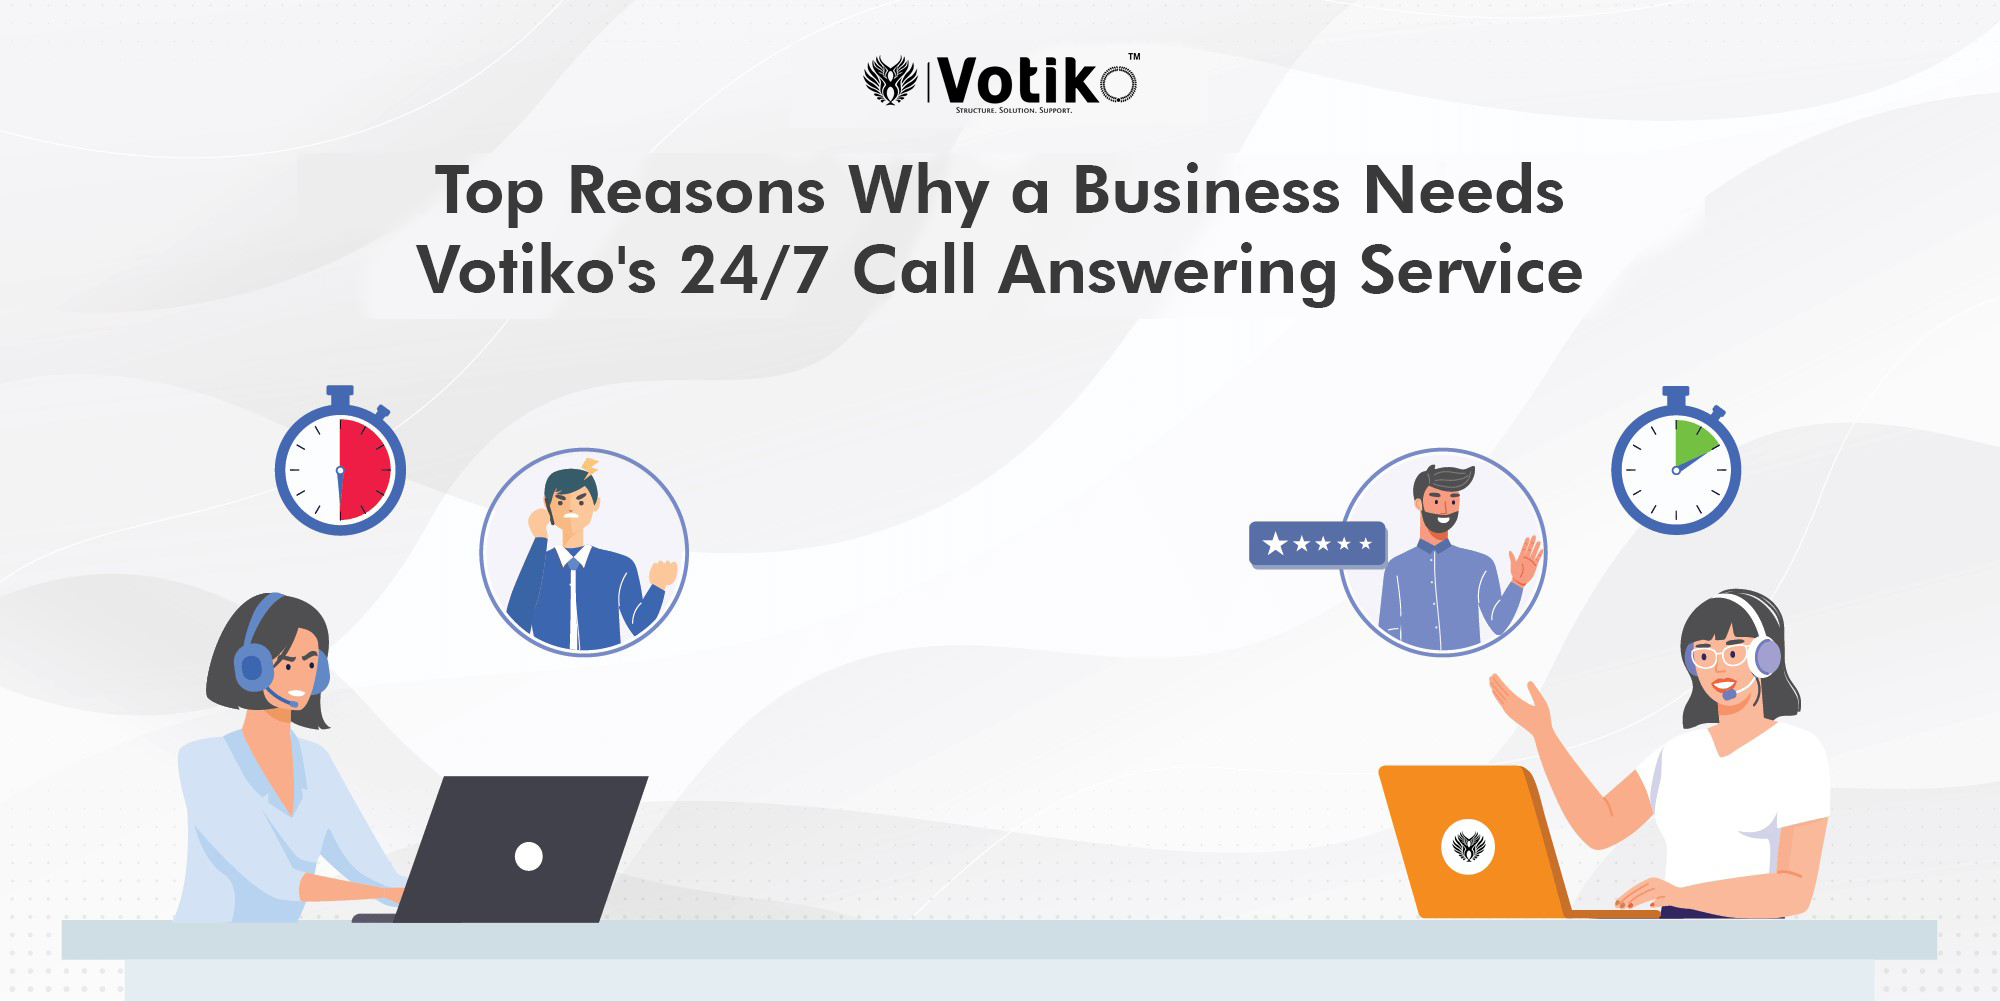 Top Reasons Why a Business Needs Votiko’s 24/7 Call Answering Service